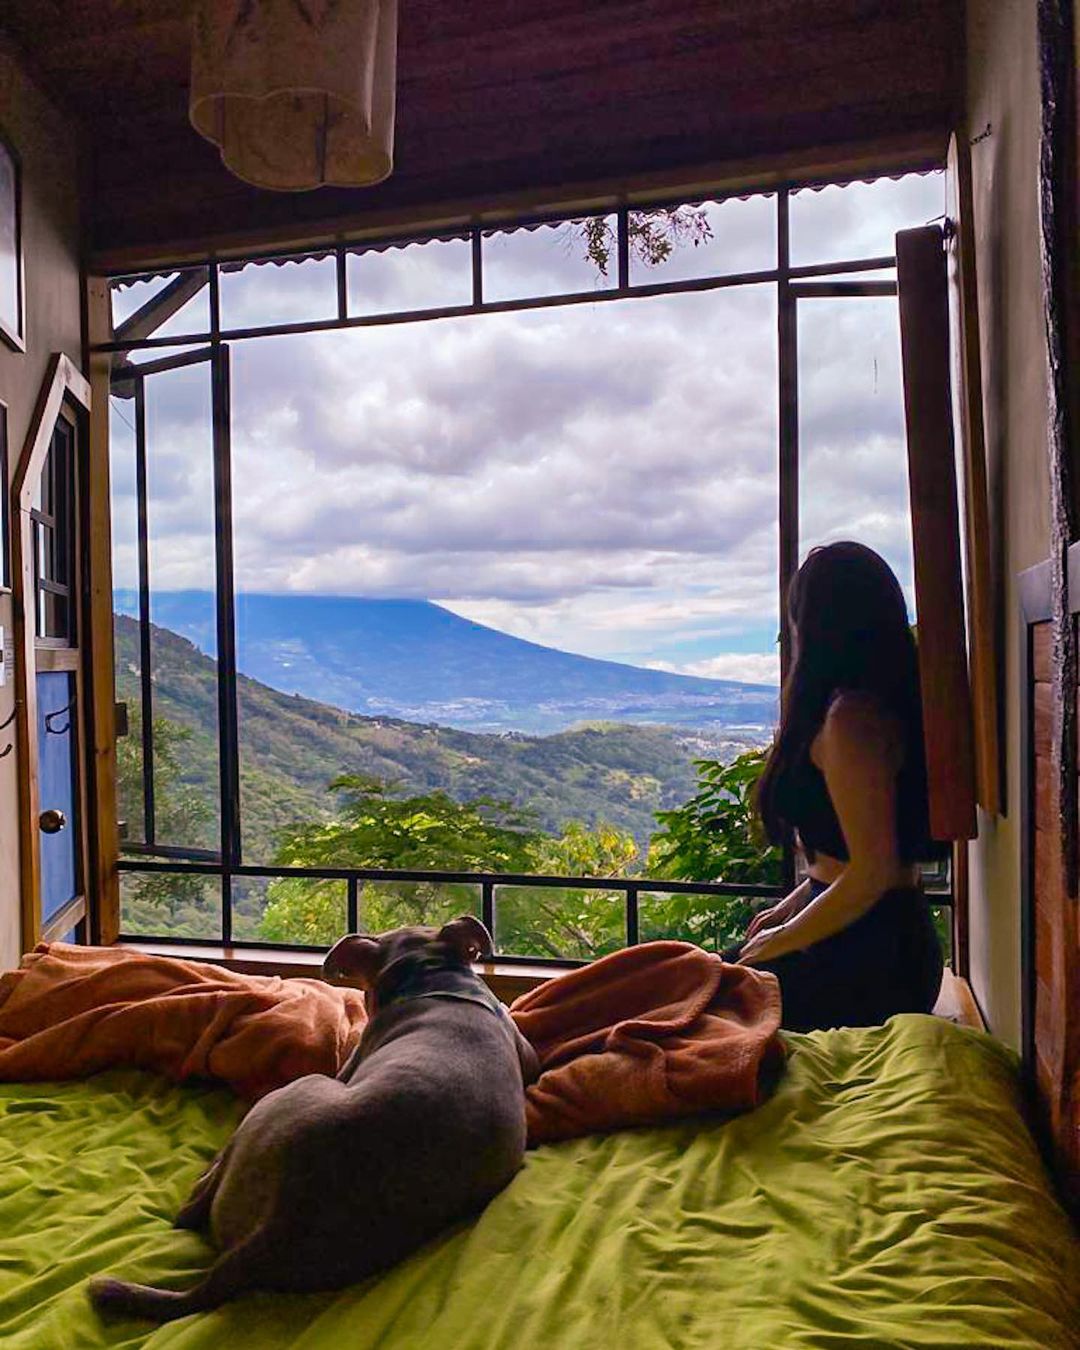 A woman and a dog relaxing and taking in the view outside the window from a room in Earth Lodge